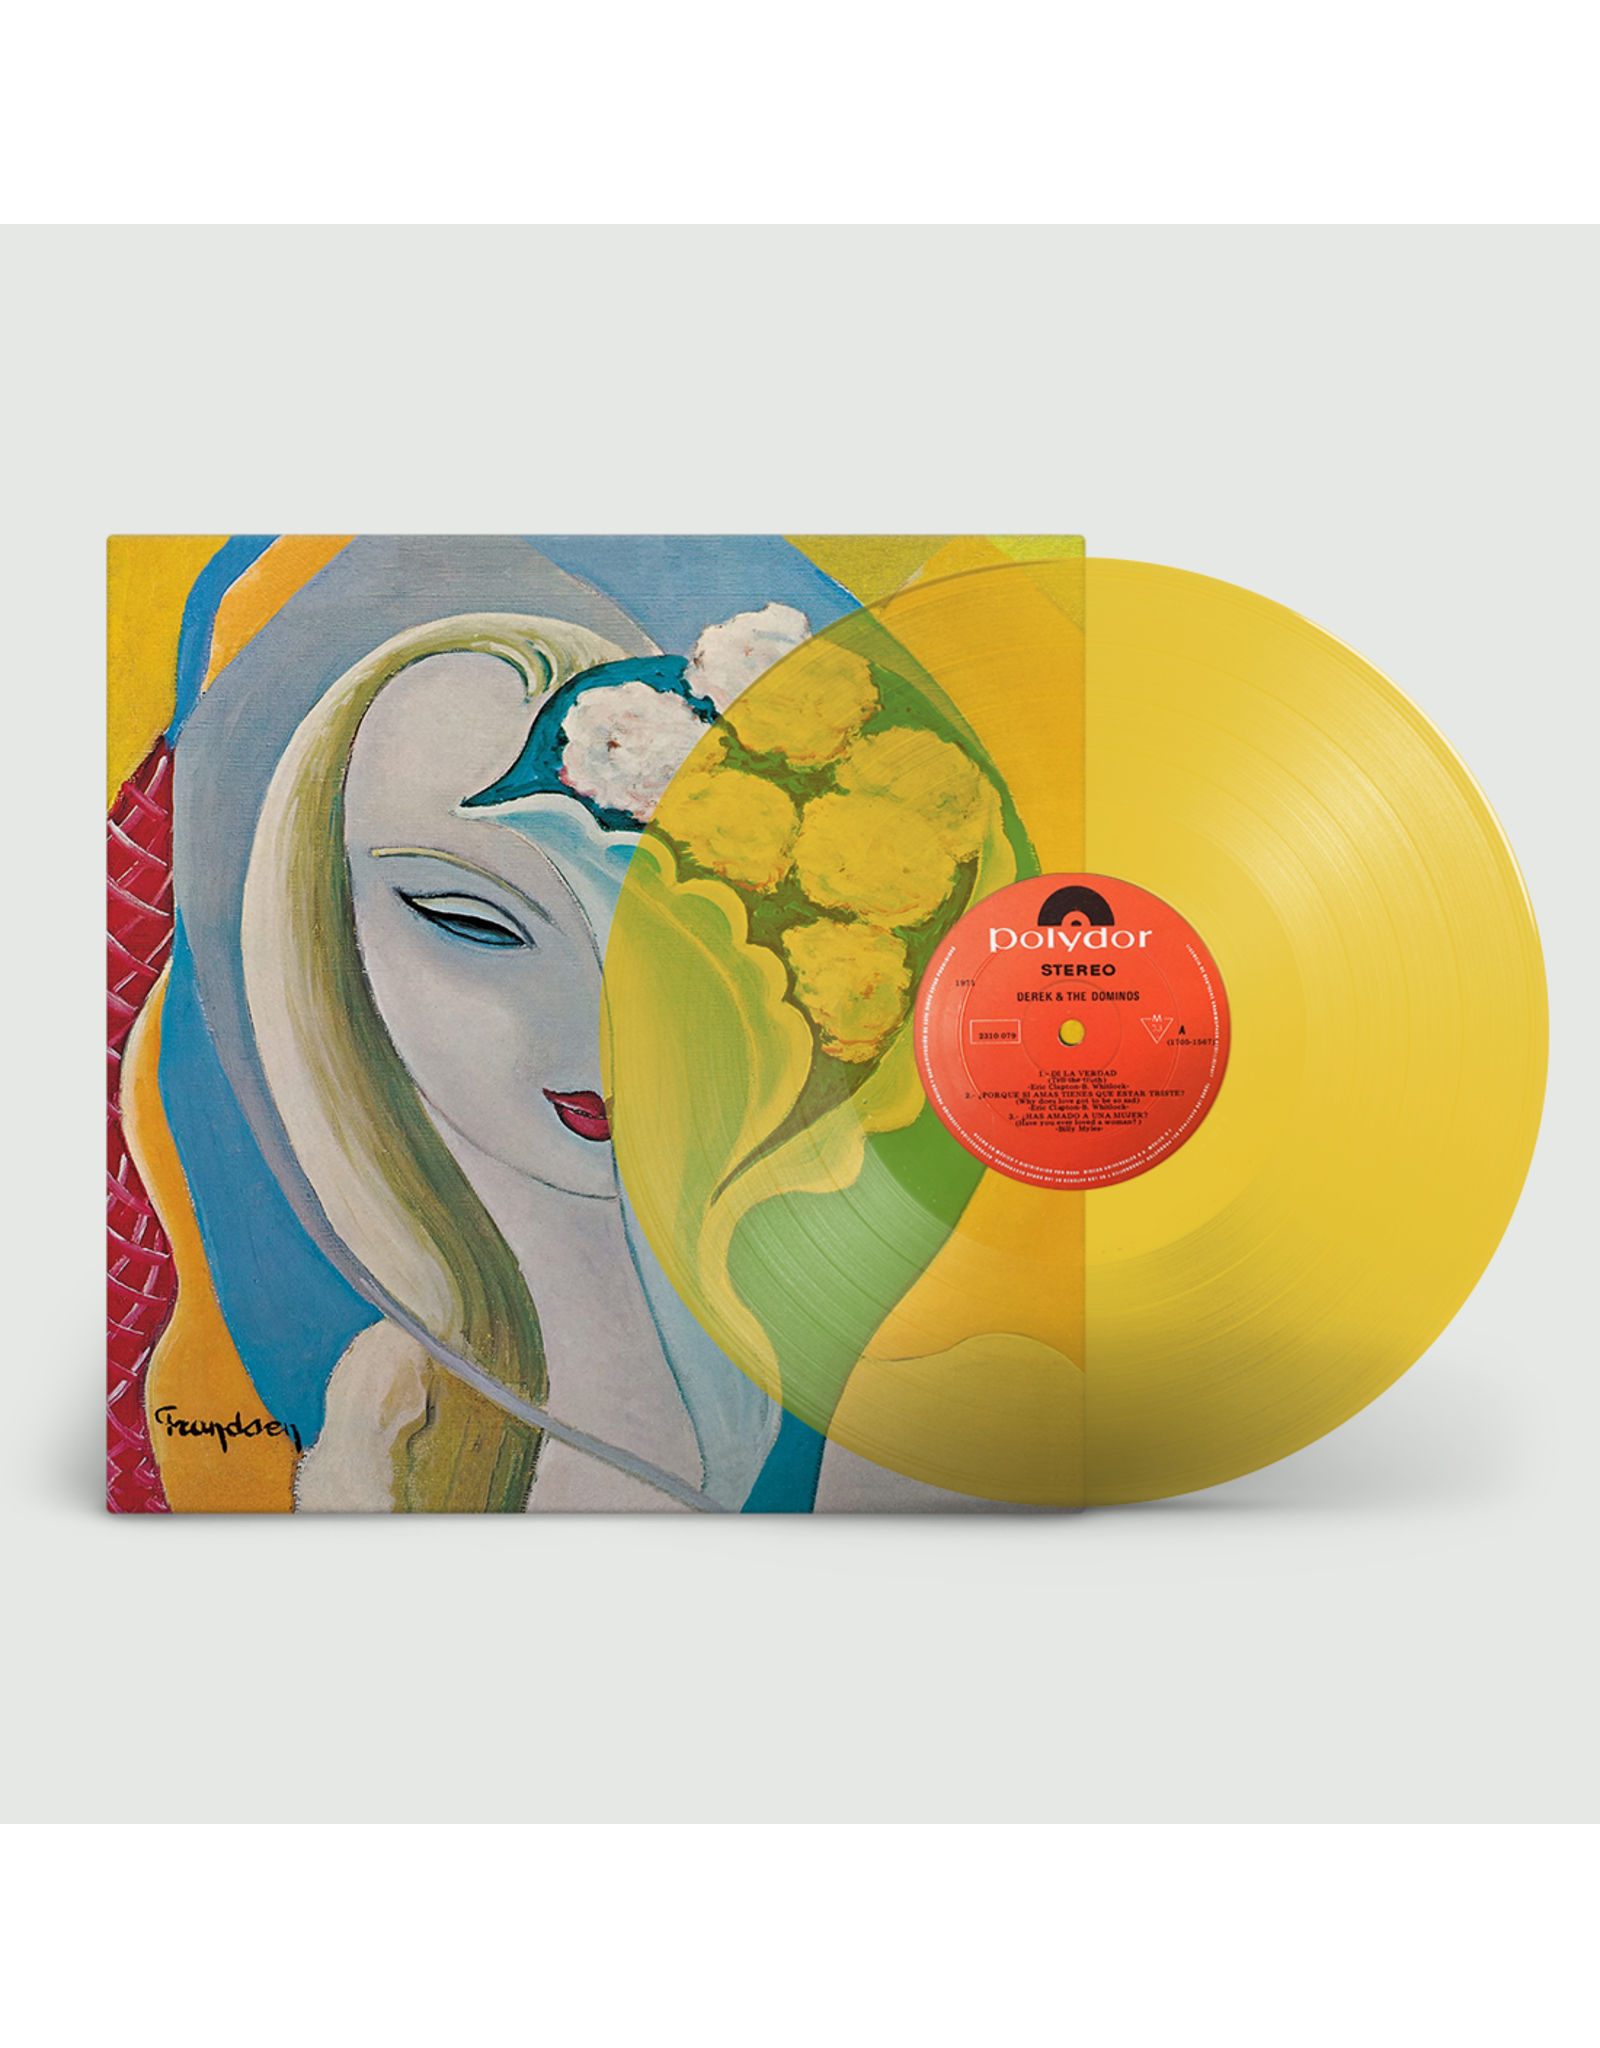 Derek & The Dominos - Layla & Other Love Stories [Clear Yellow Vinyl]